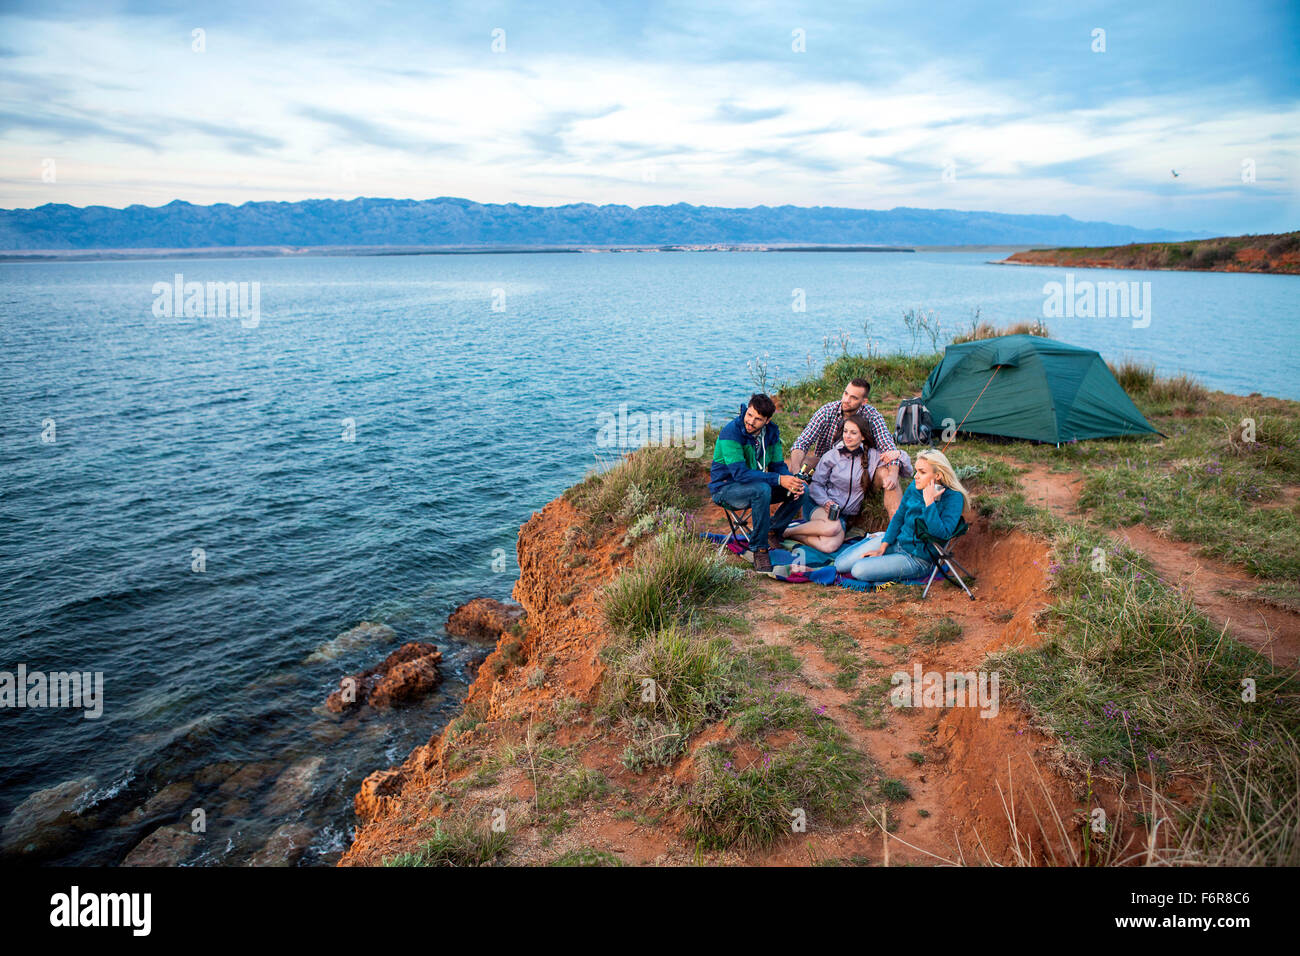 Group of friends sitting at campsite on water's edge Stock Photo